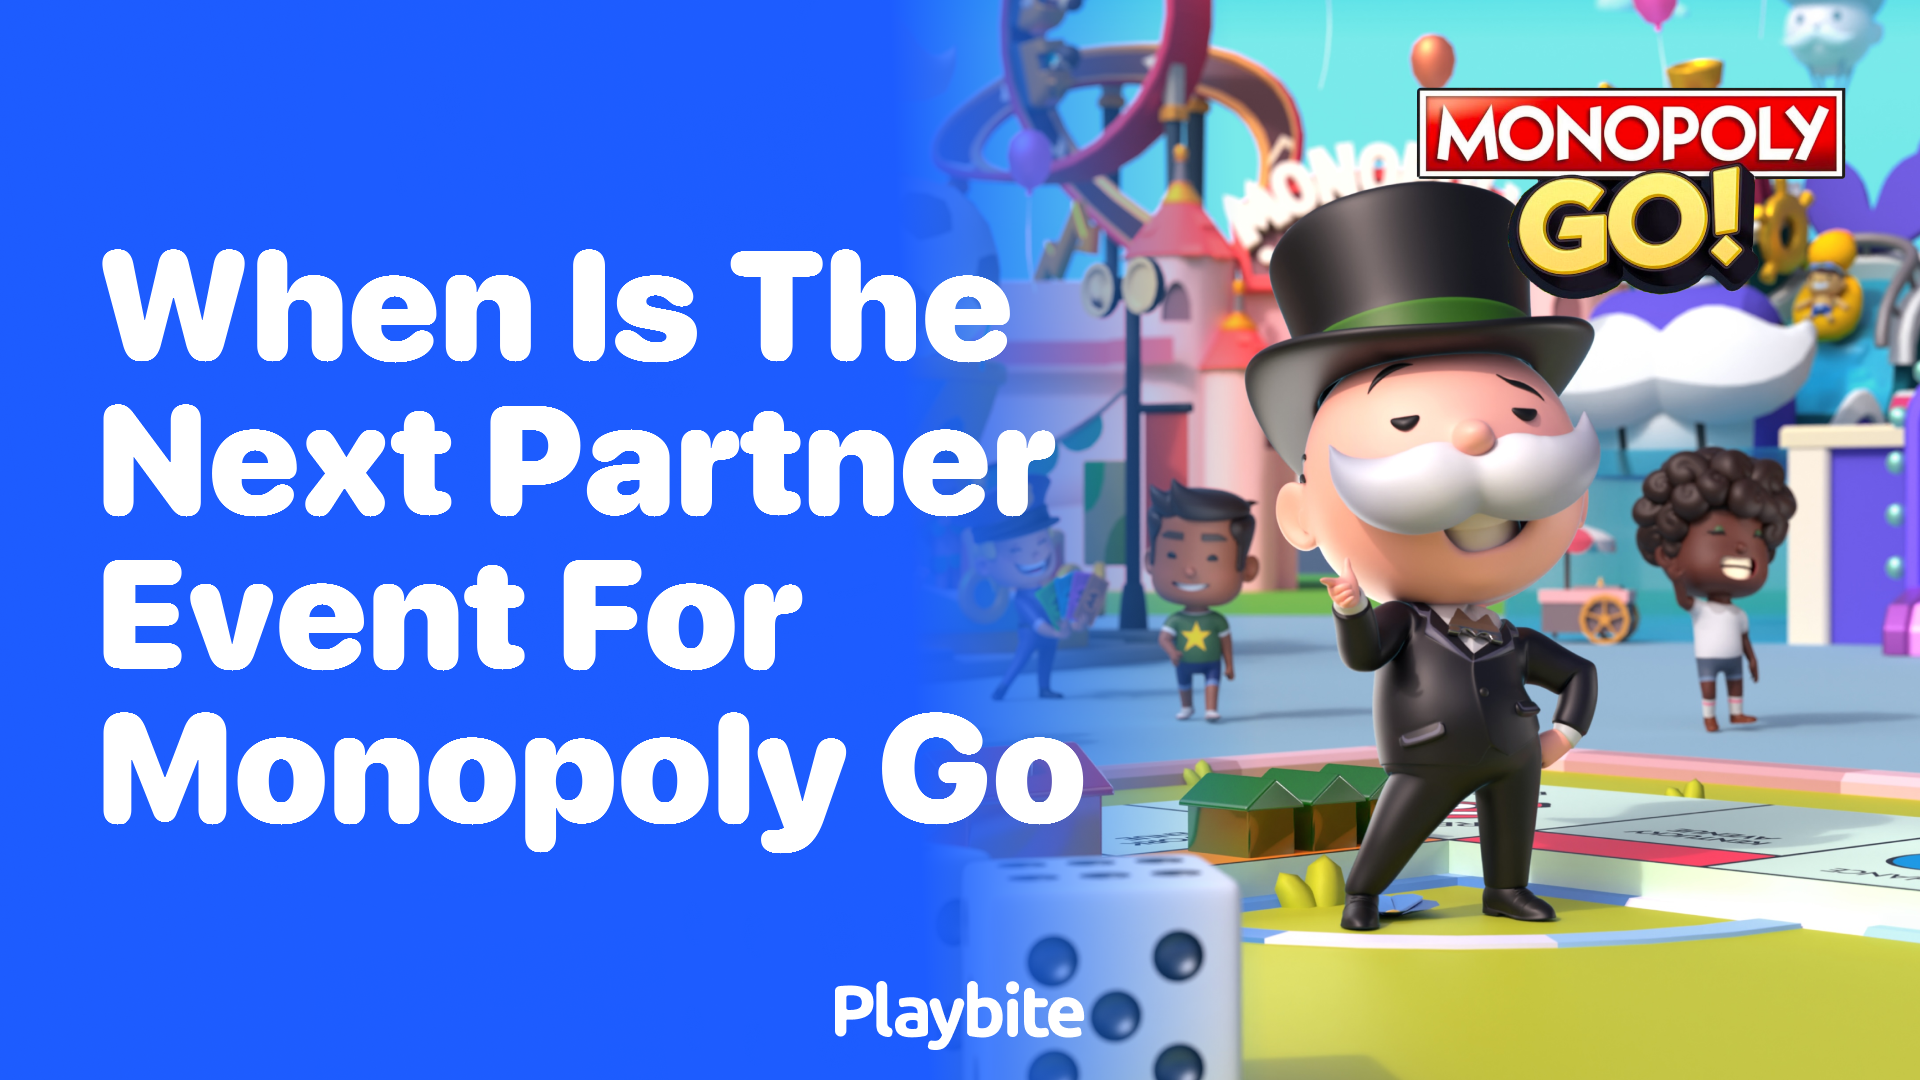 When Is the Next Partner Event for Monopoly Go?